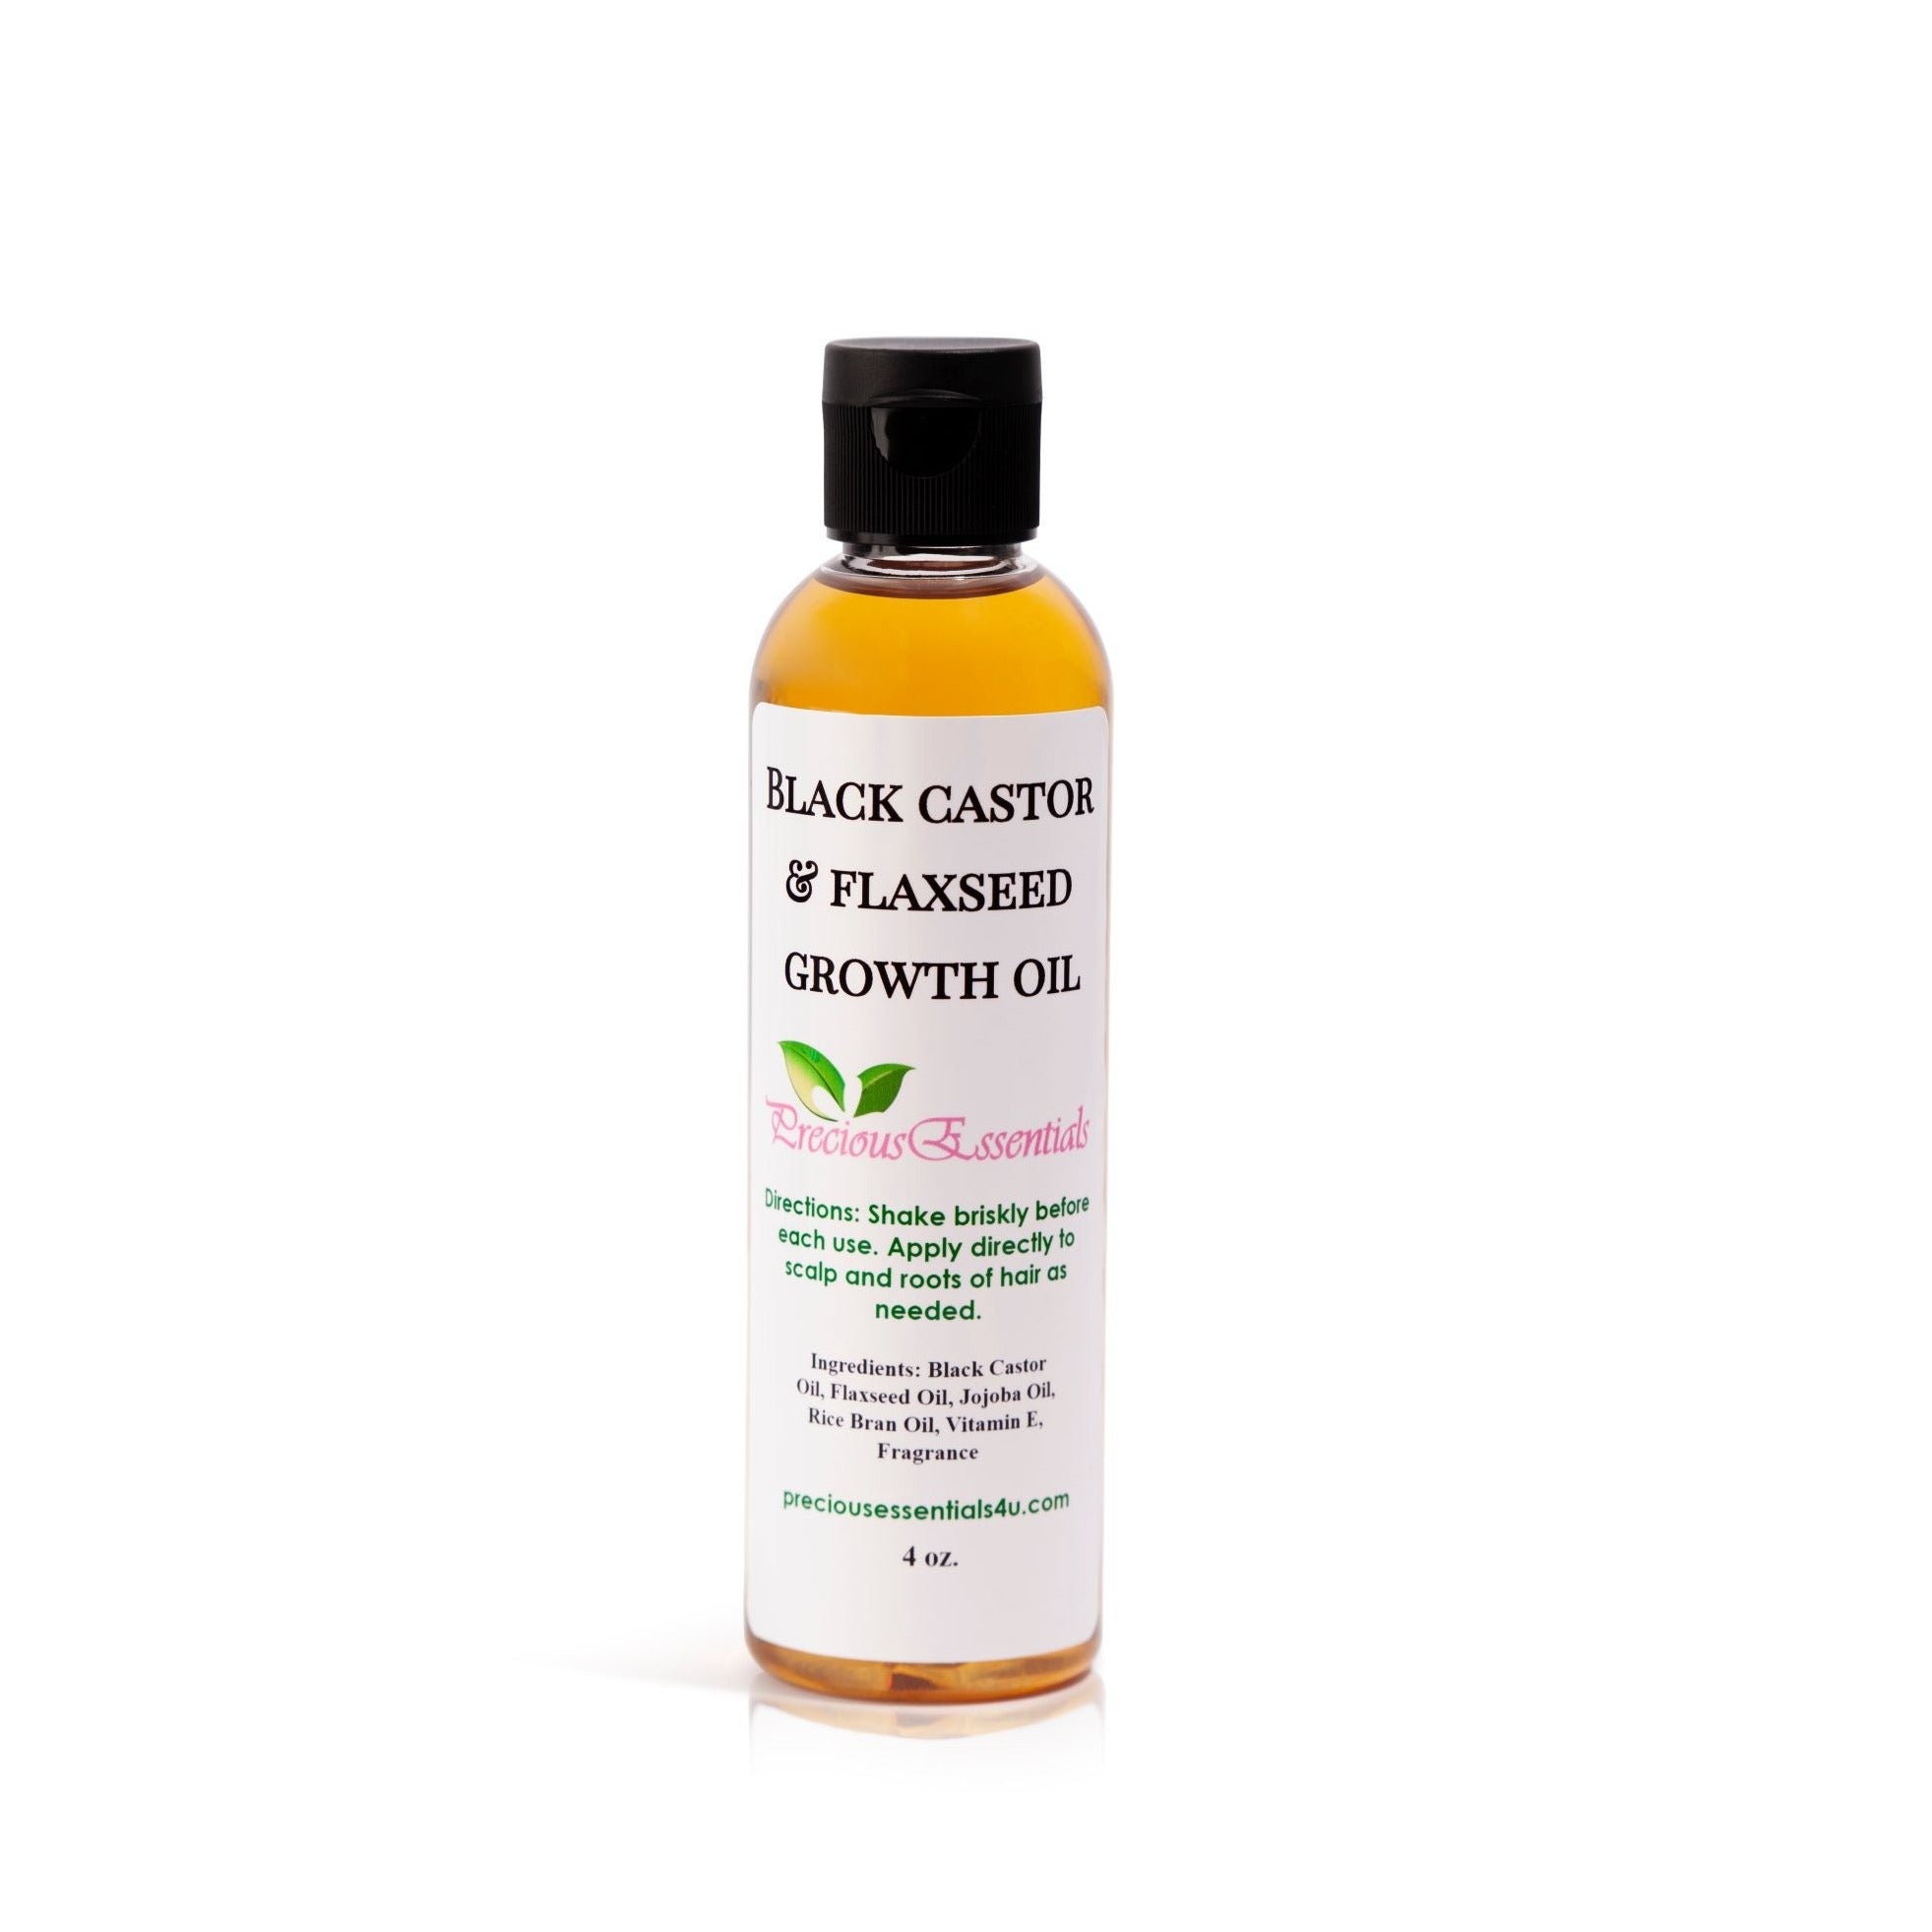 Black Castor & Flaxseed Growth Oil for Hair